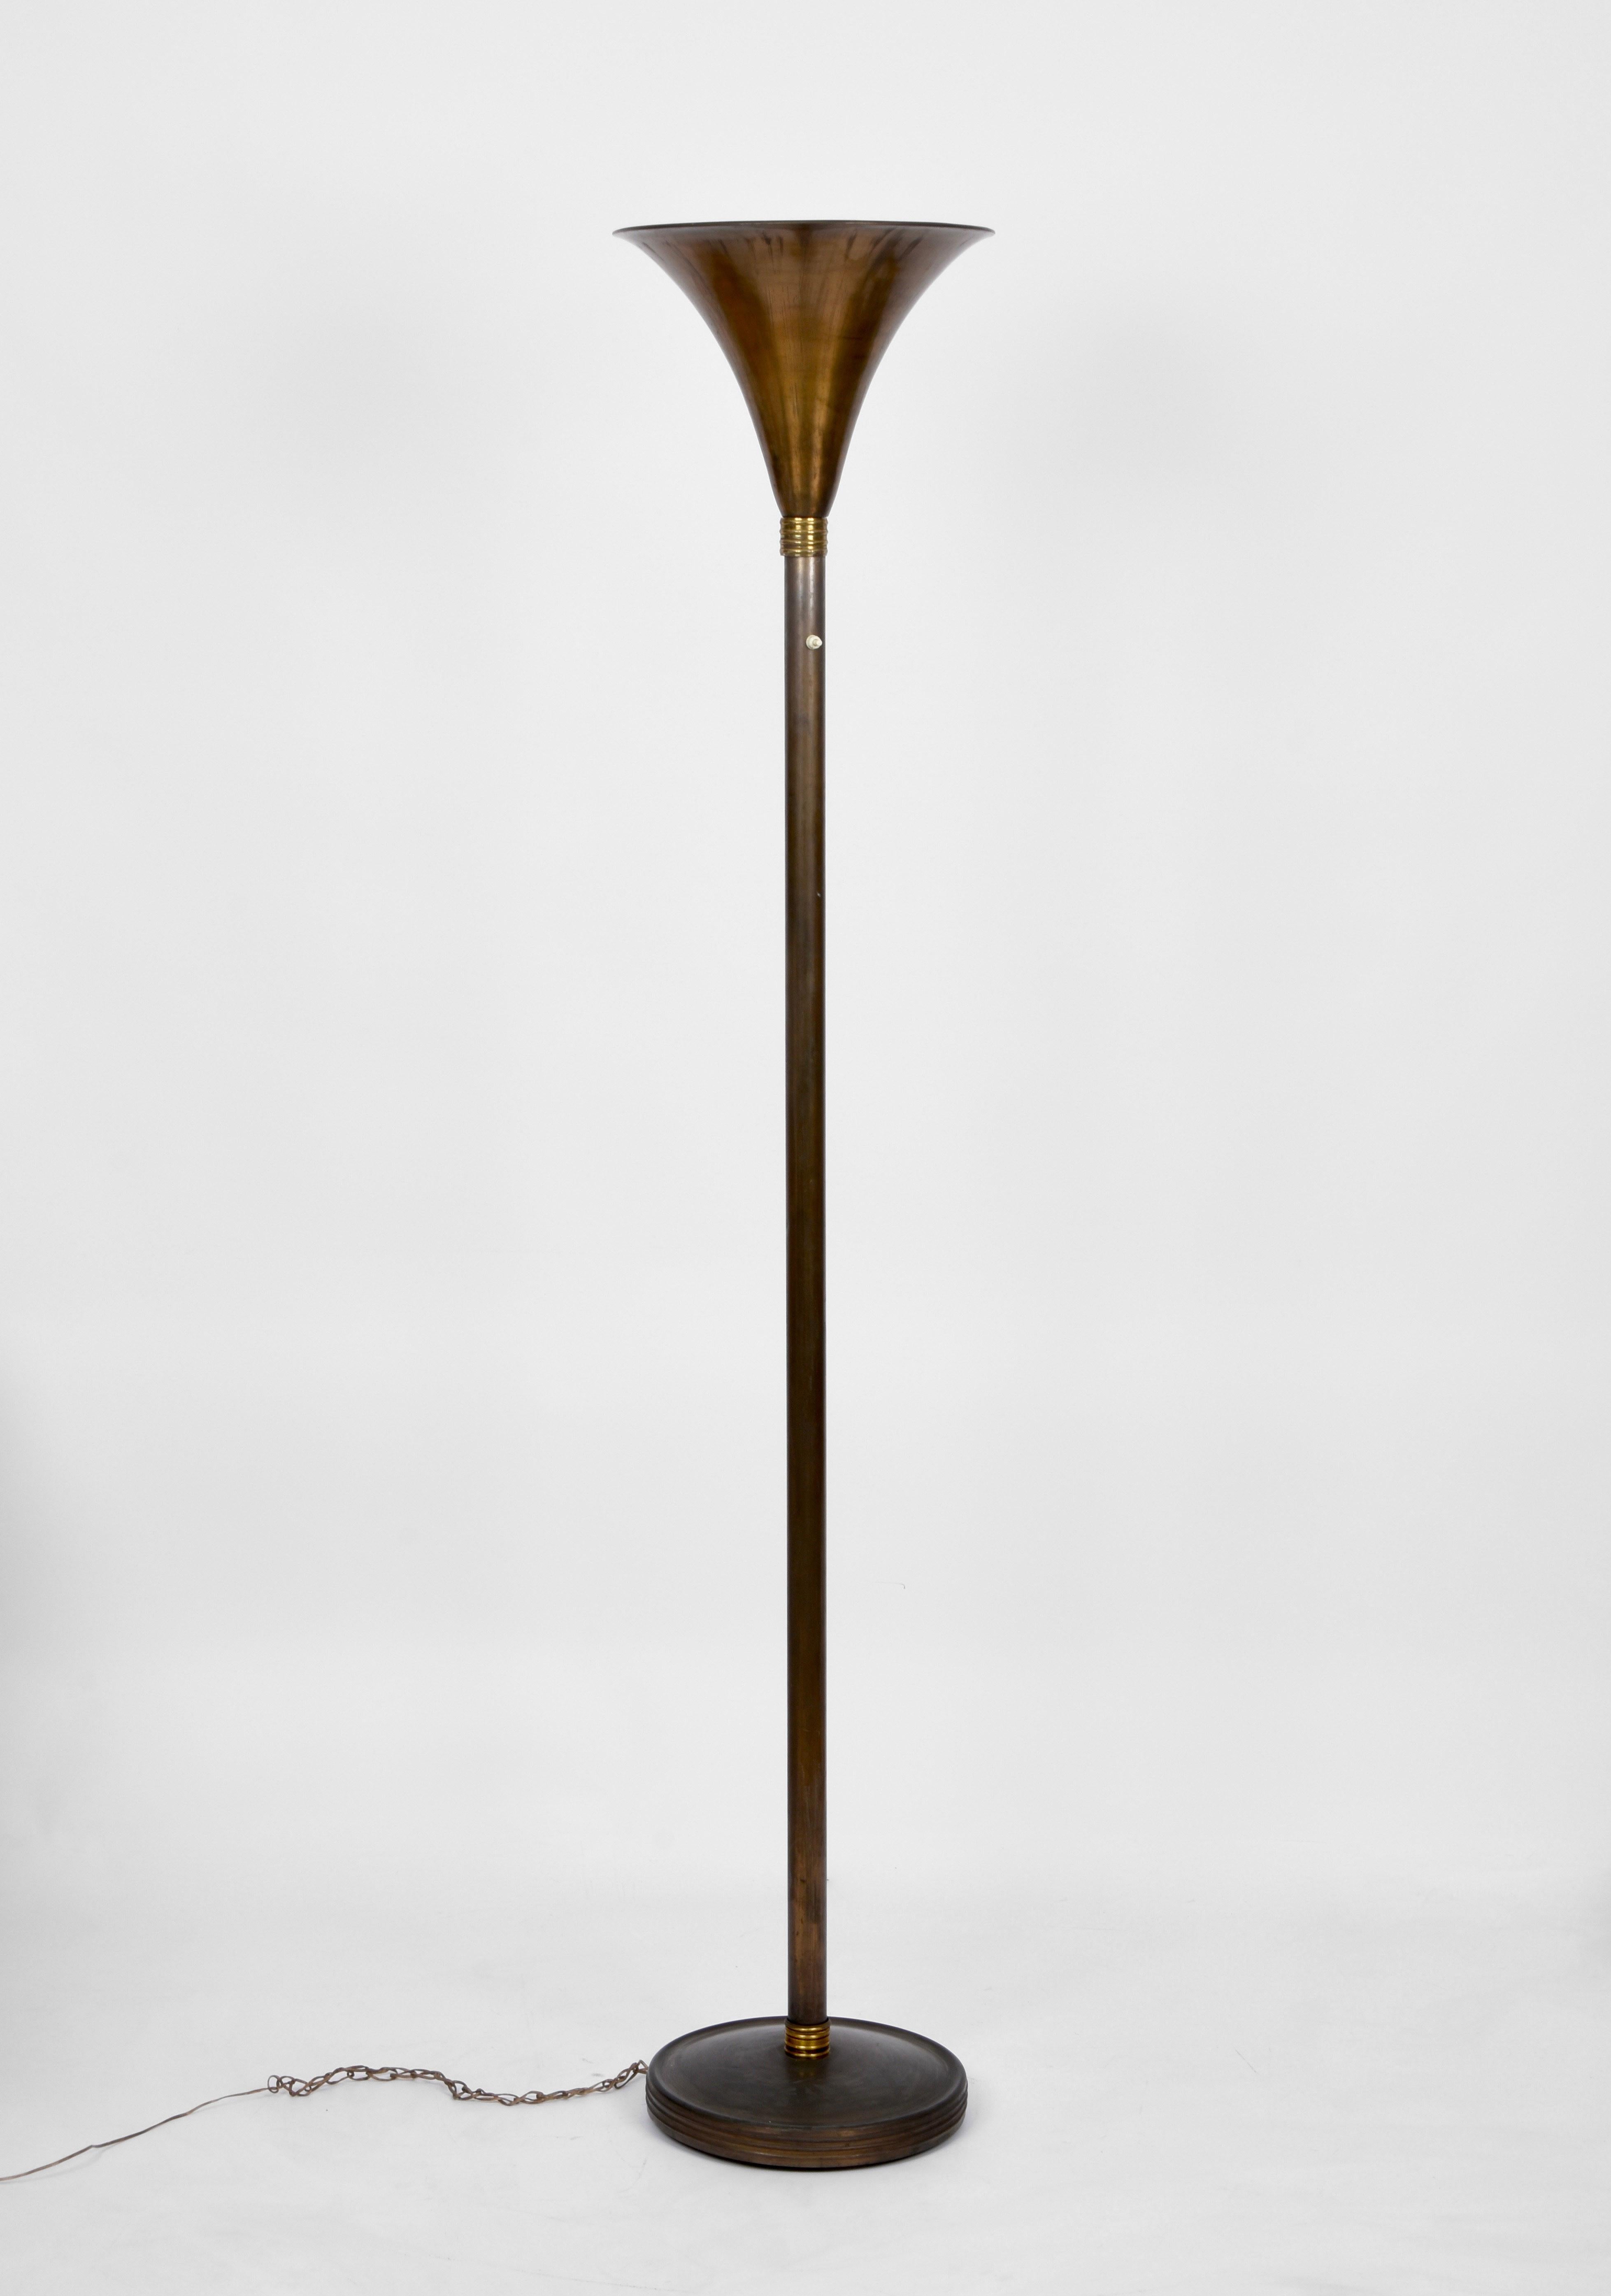 Amazing art deco bronzed metal and brass floor lamp. This wonderful item was produced in Italy during the 1940s and it is attributed to Pietro Chiesa.

This refined floor lamp in brass and patinated bronze from the 1940s is reminiscent of